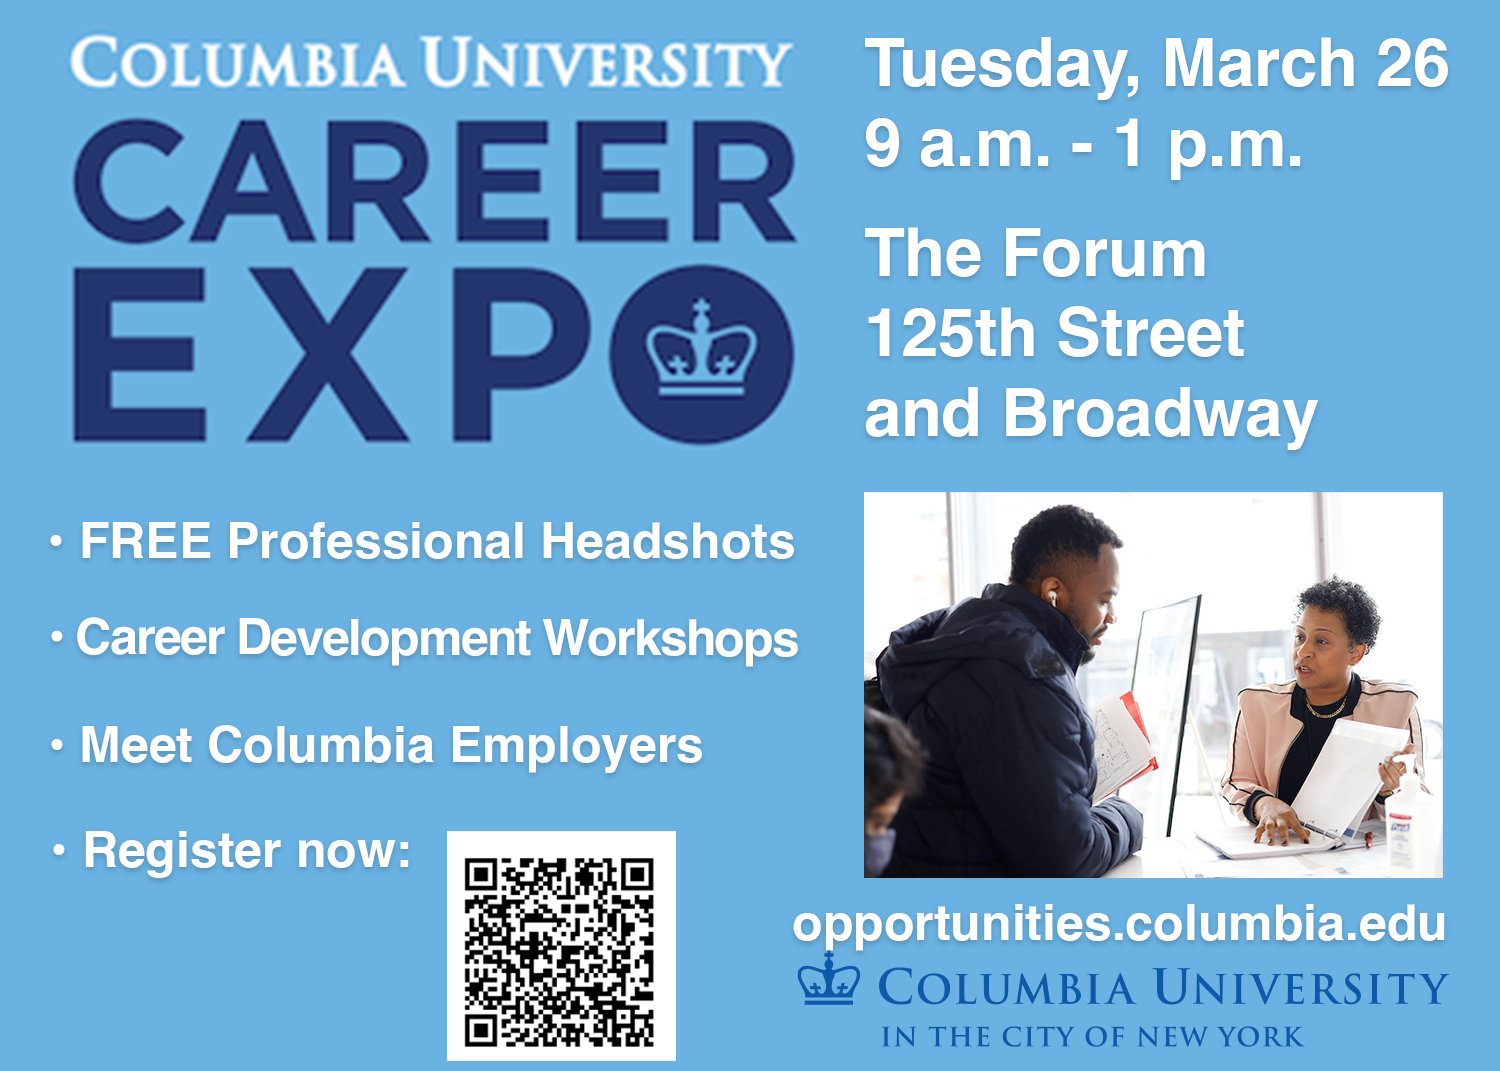 Flyer promoting Career Expo on March 26, 2024 from 9 a.m. to 1 p.m. at The Forum